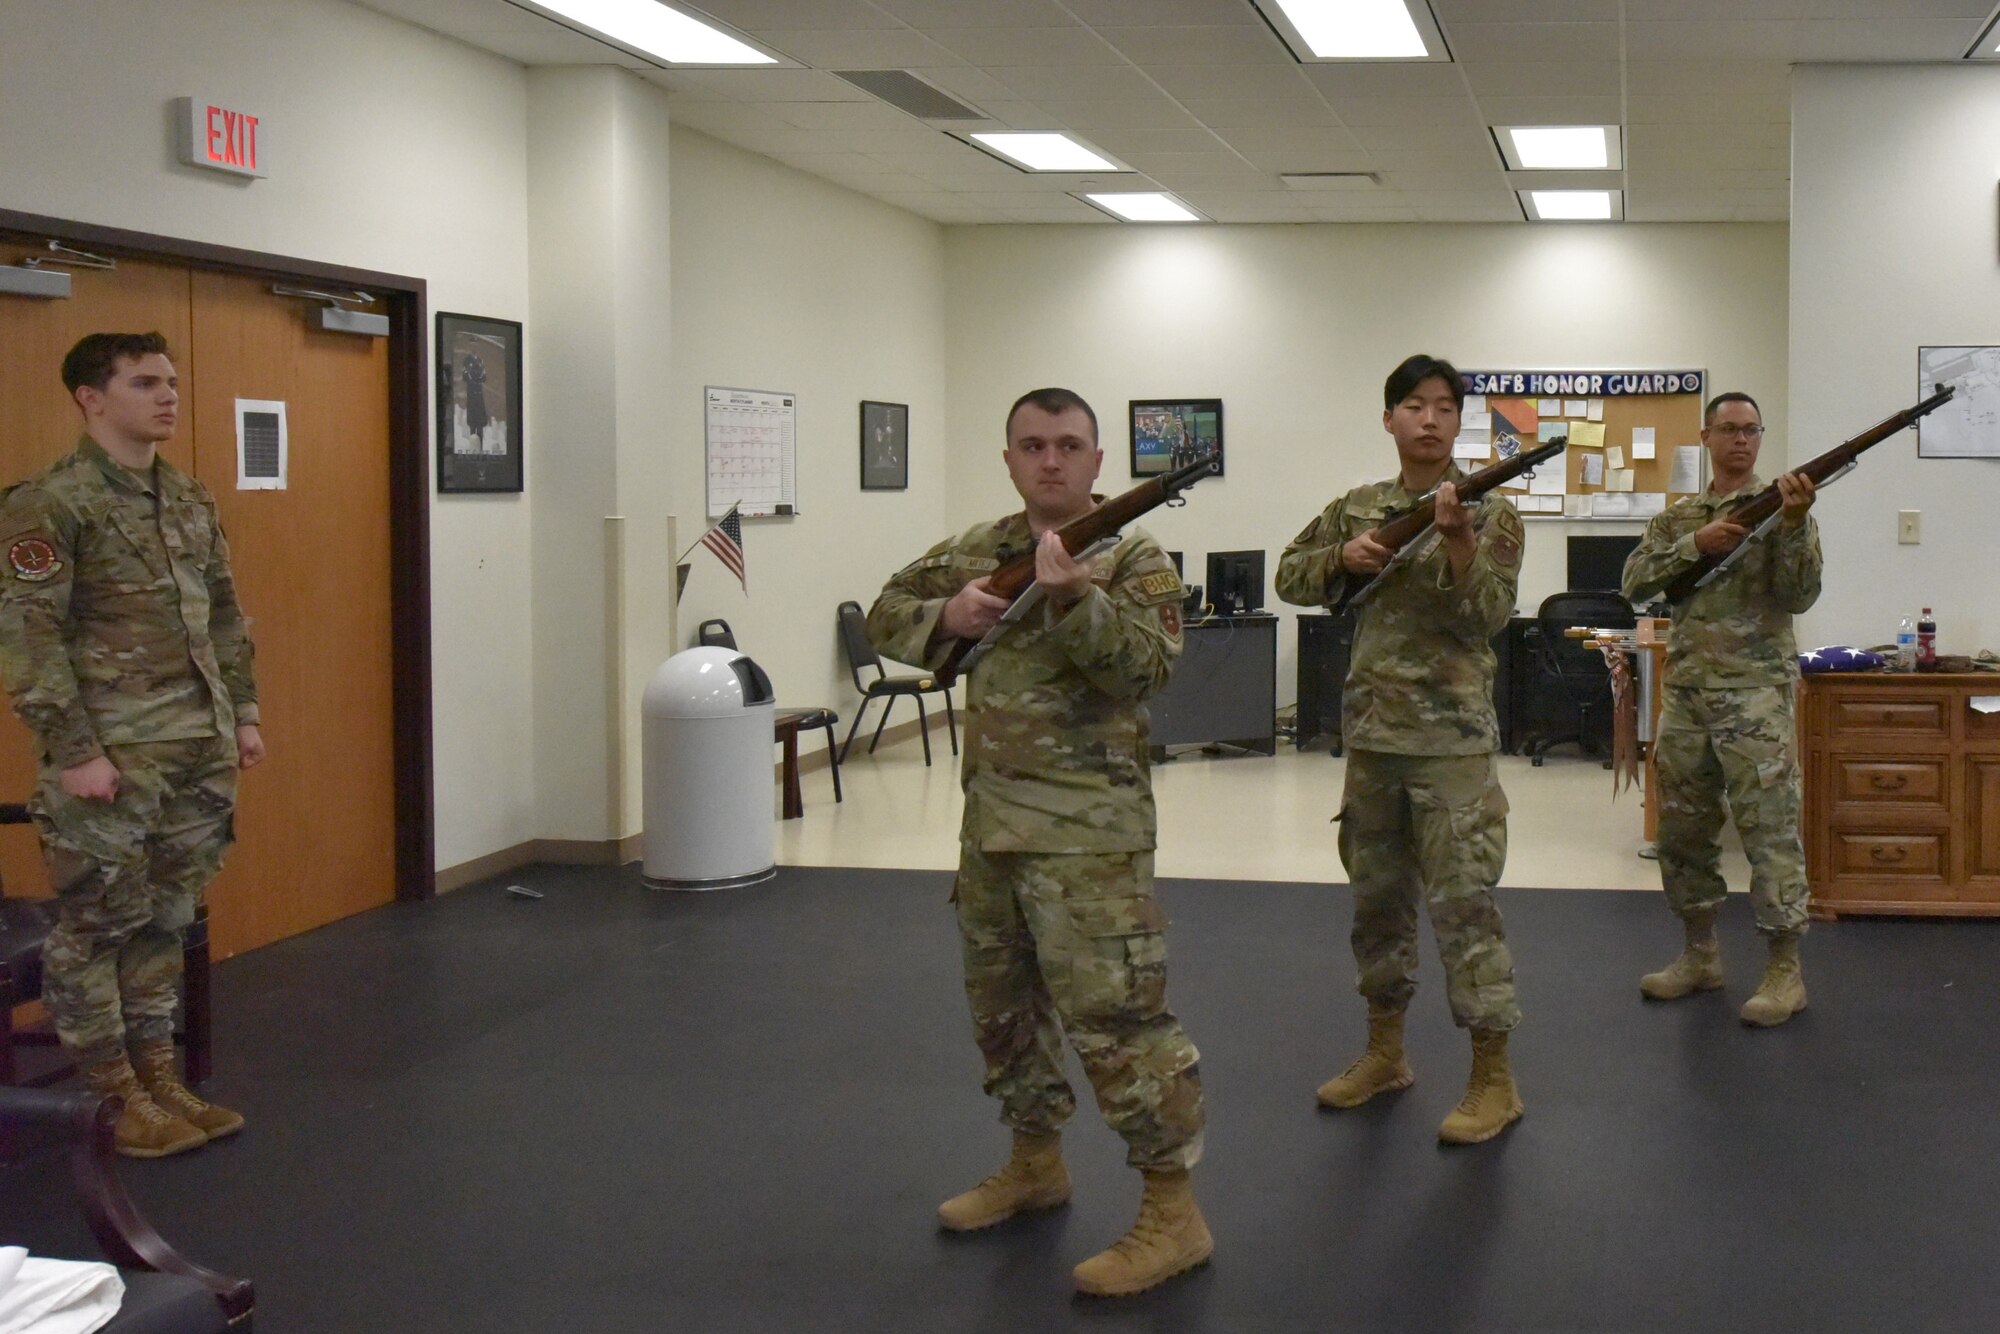 Three Airmen with ceremonial rifles dry fire while another airman stands at attention